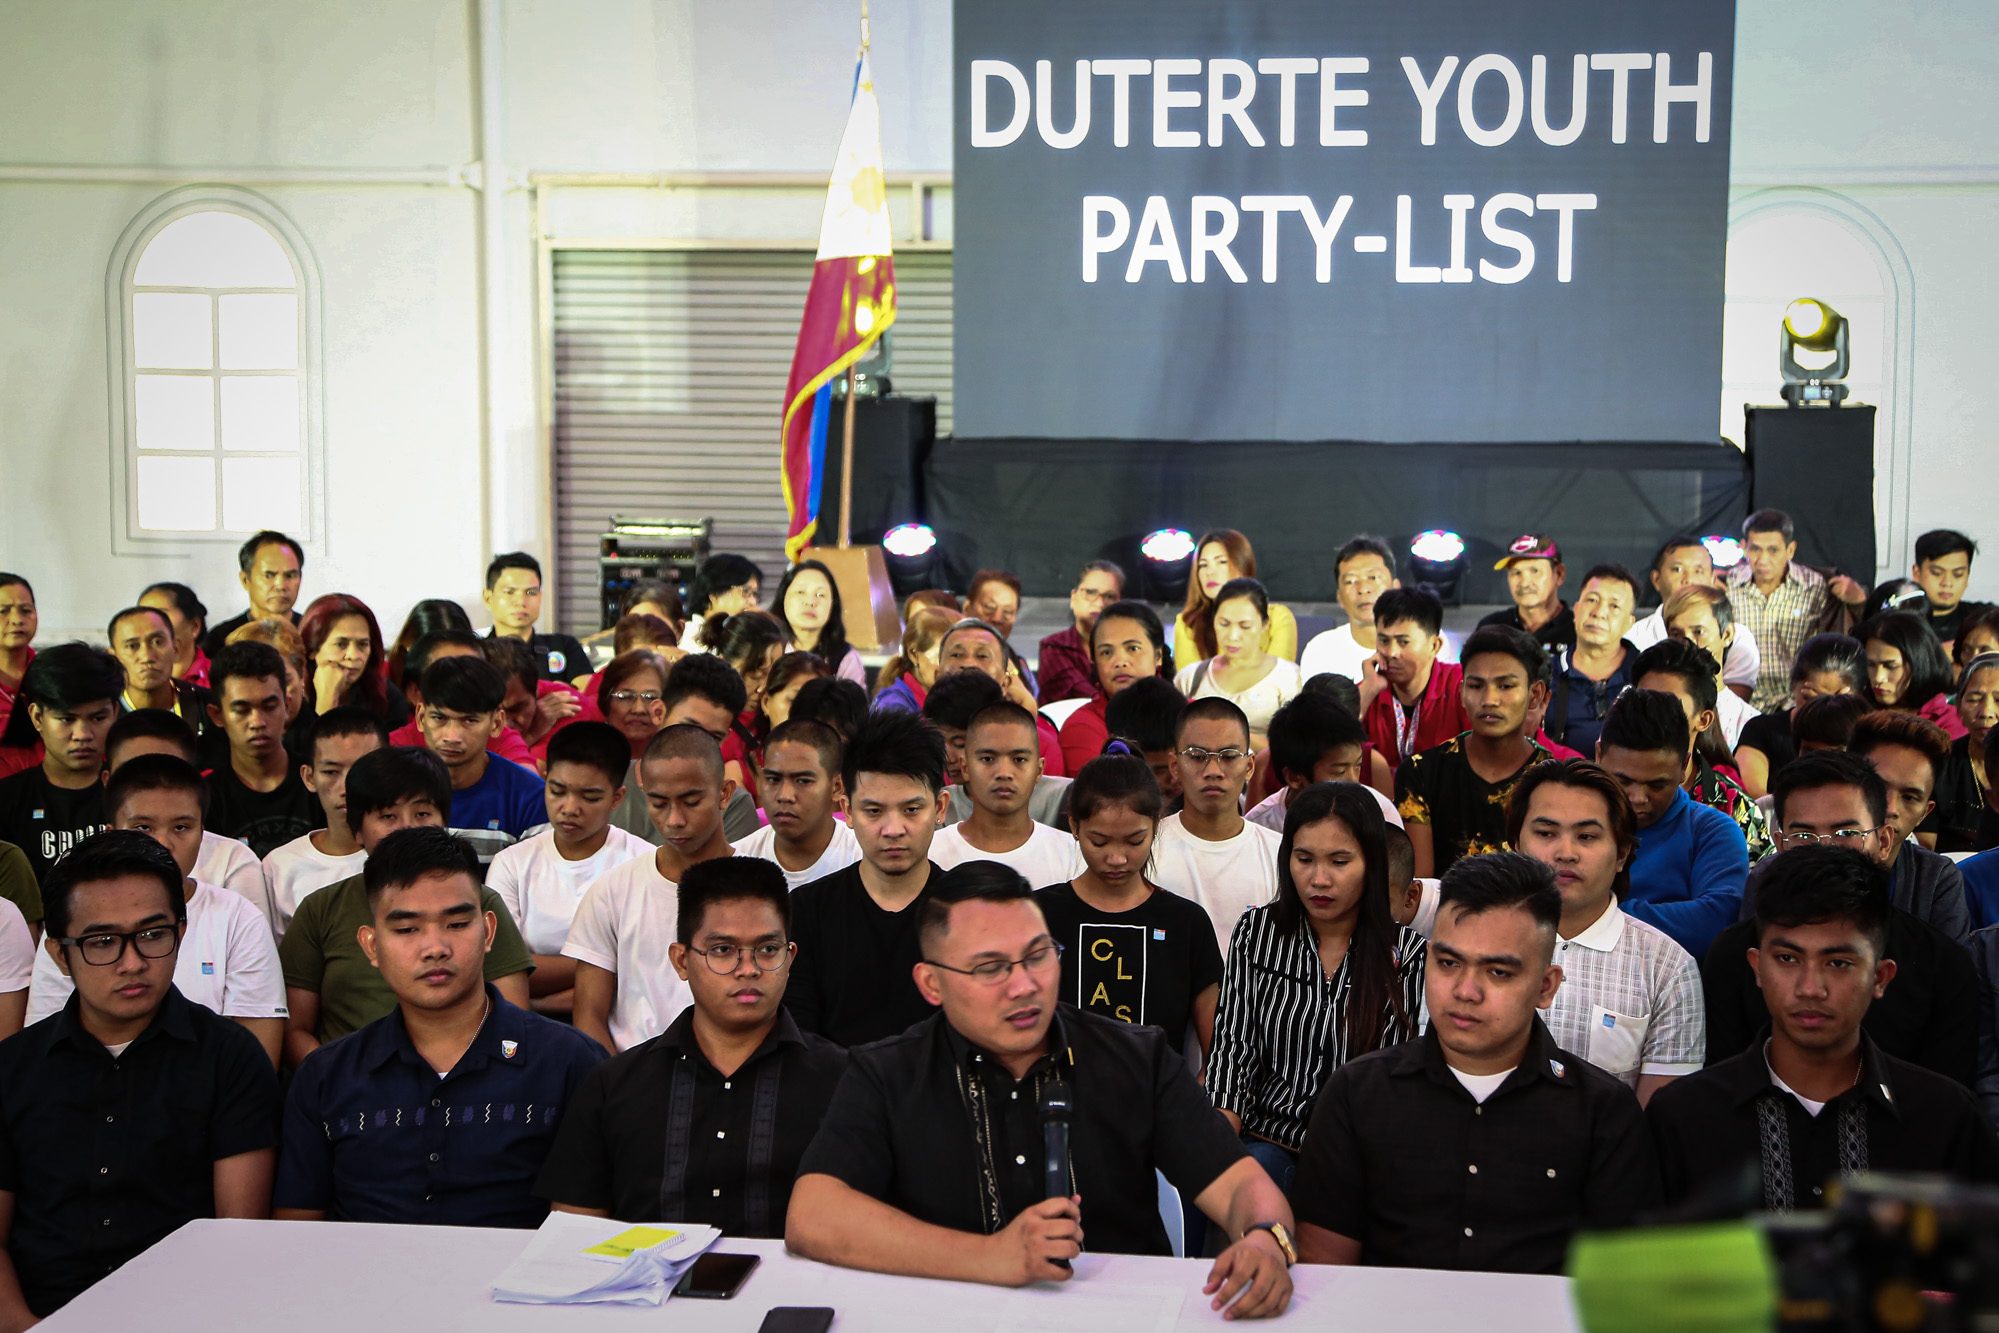 Comelec to hear petition seeking to cancel Duterte Youth registration